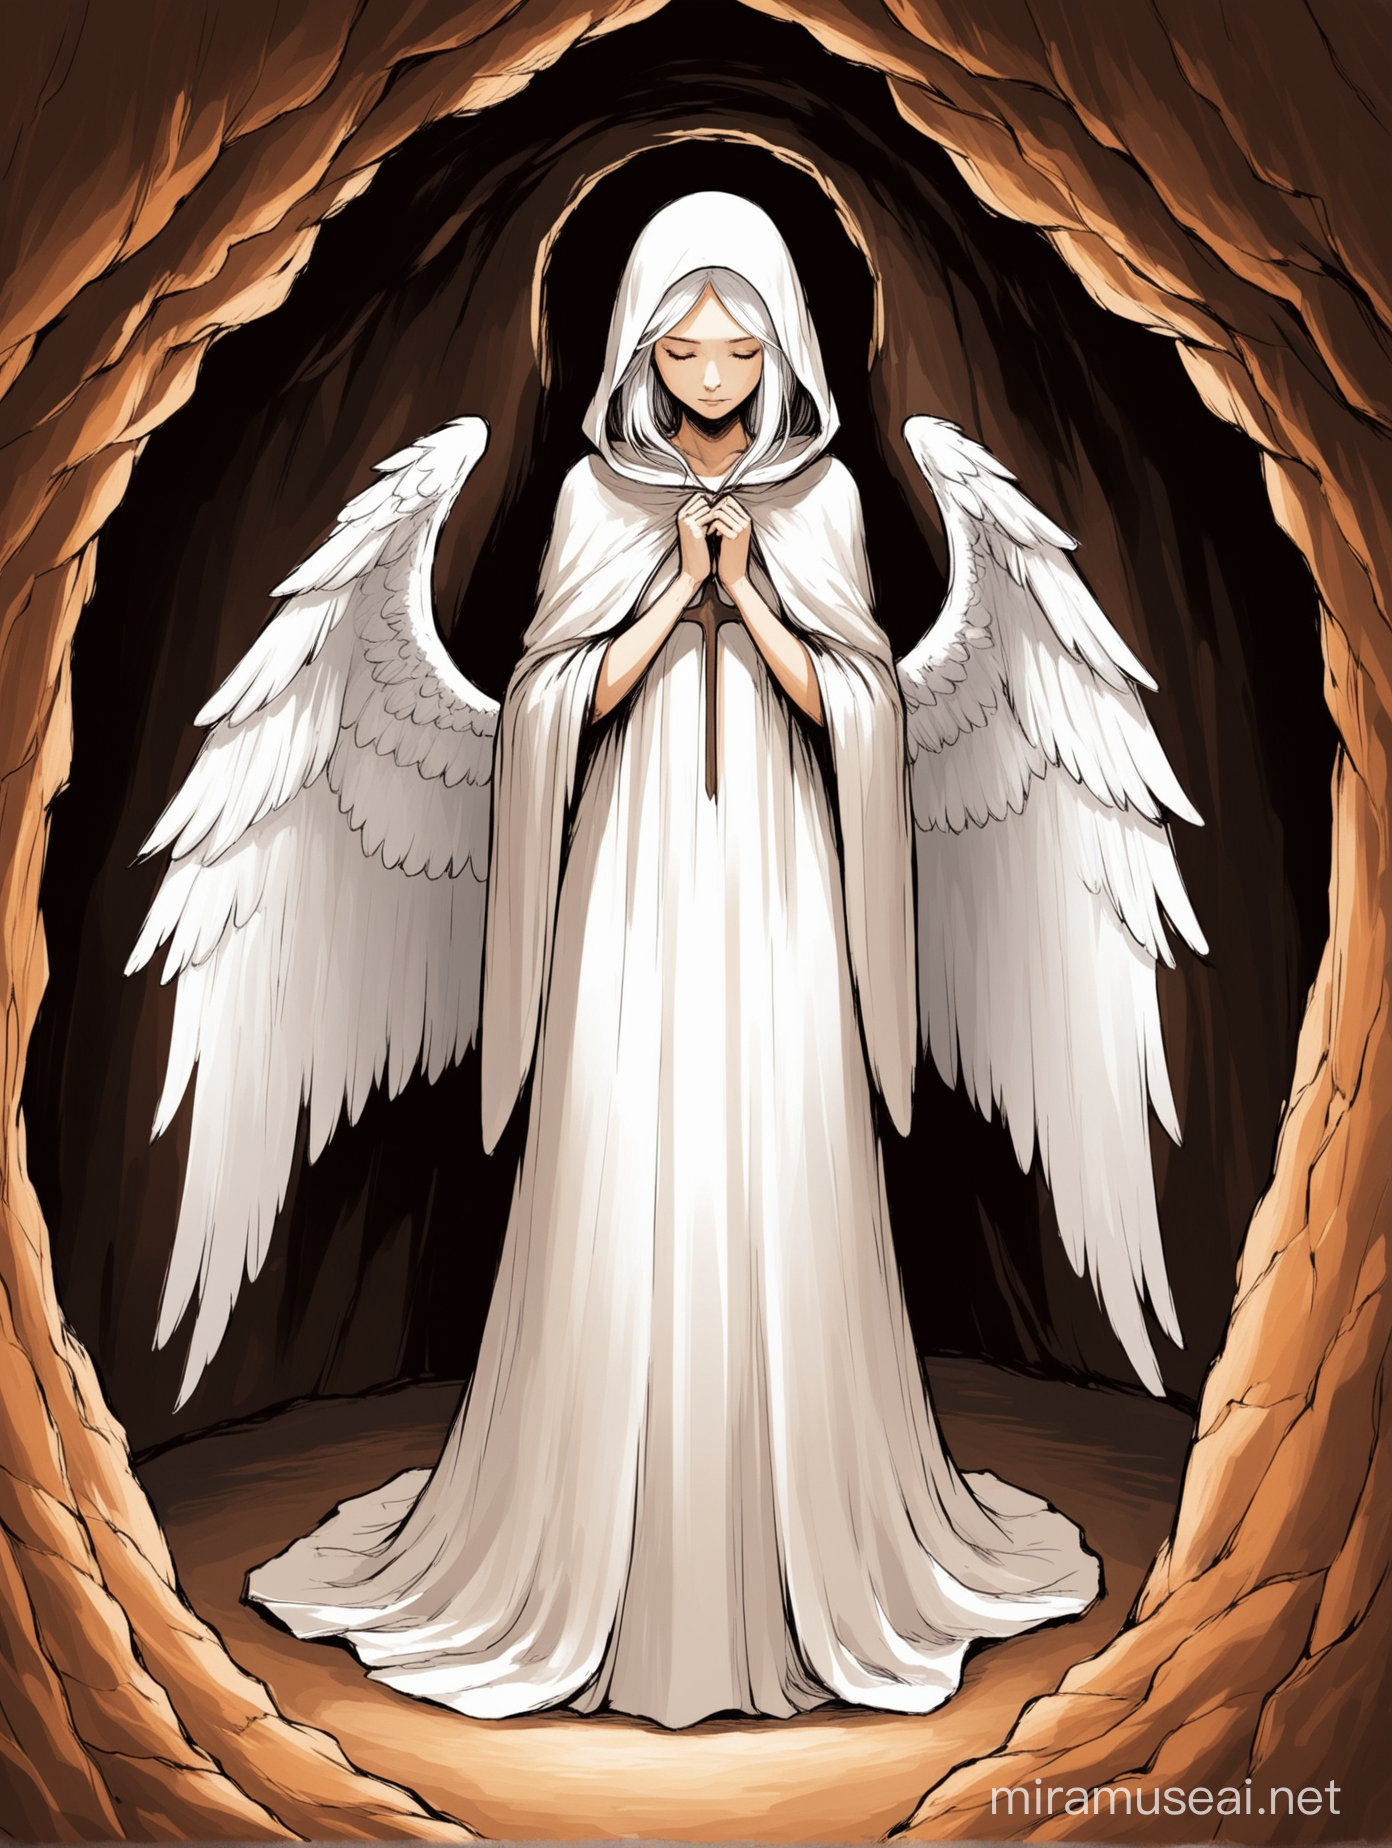 Peaceful Cave Drawing of a Cloaked Angelic Woman with White Hair